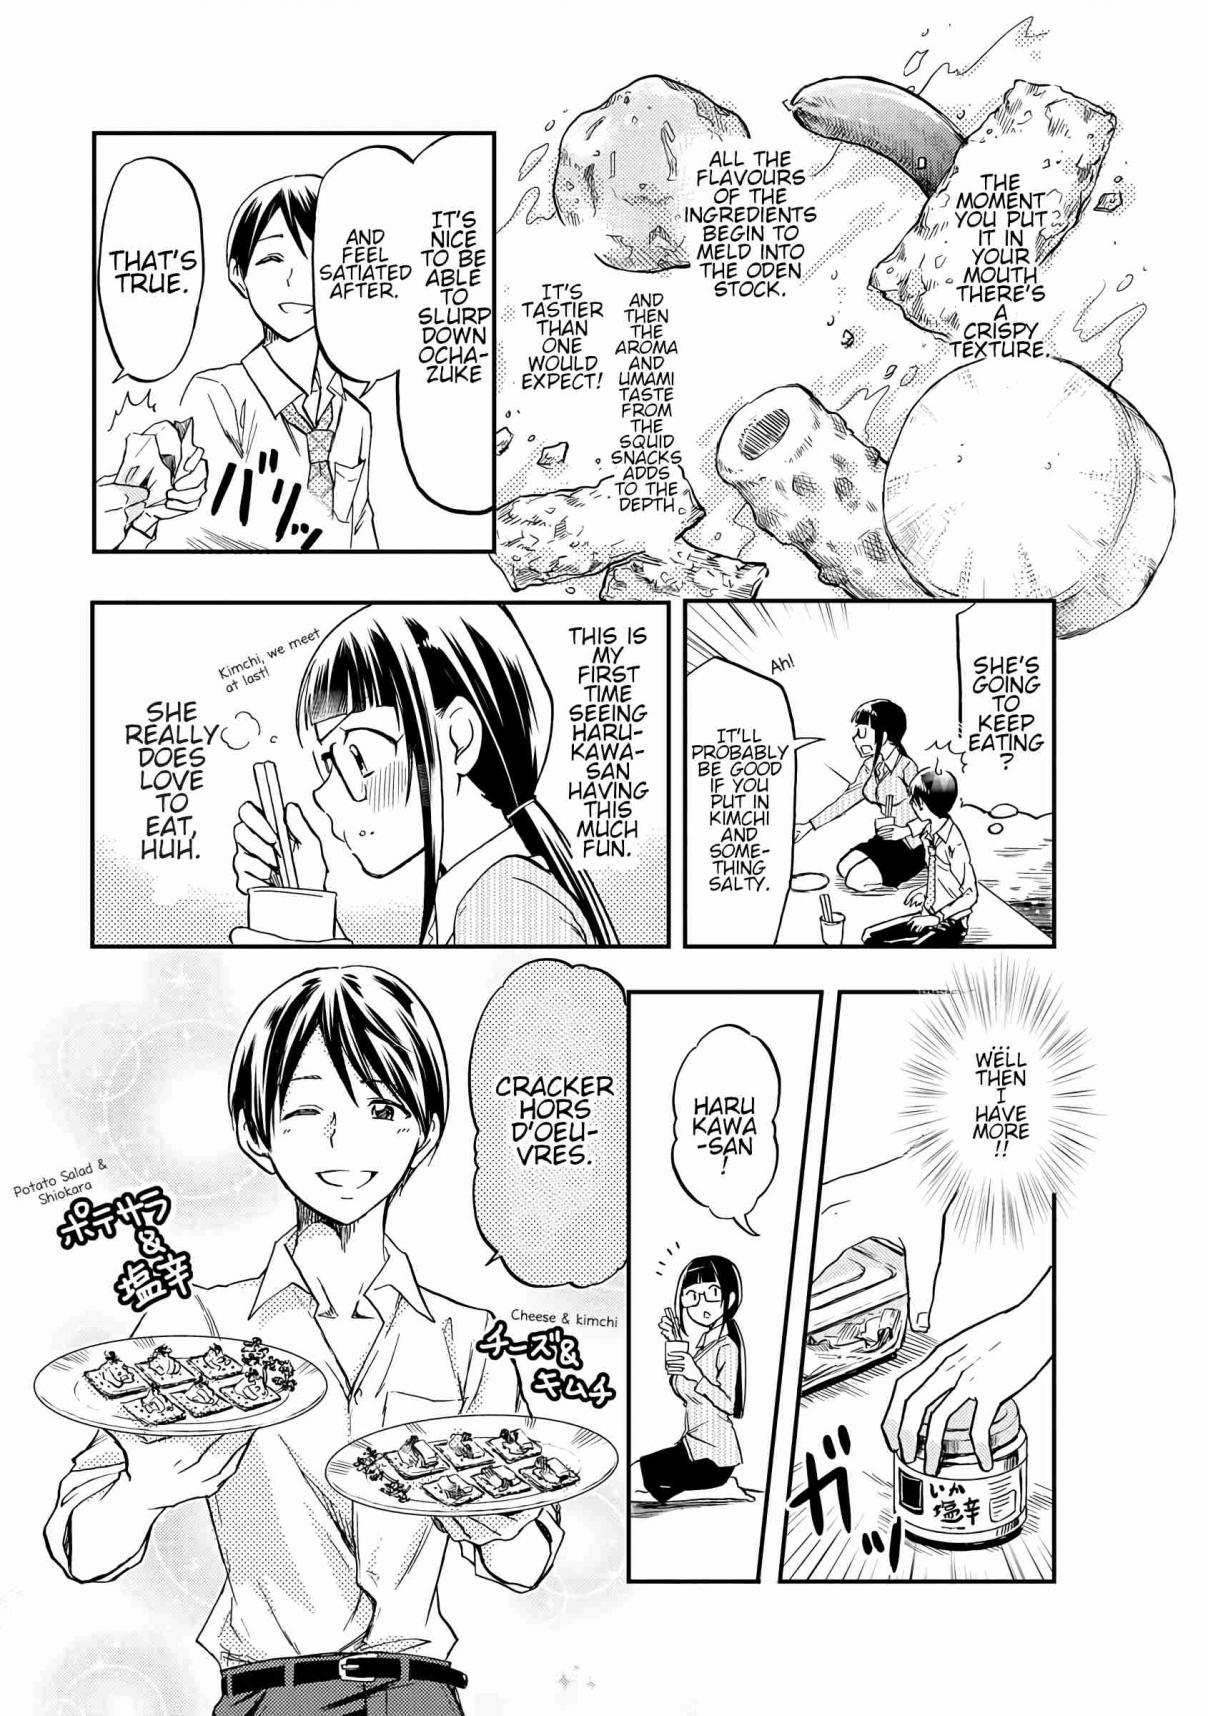 Harukawa san is Hungry Today Too. Vol. 1 Ch. 4 All You Can Eat At The Flower Viewing Party